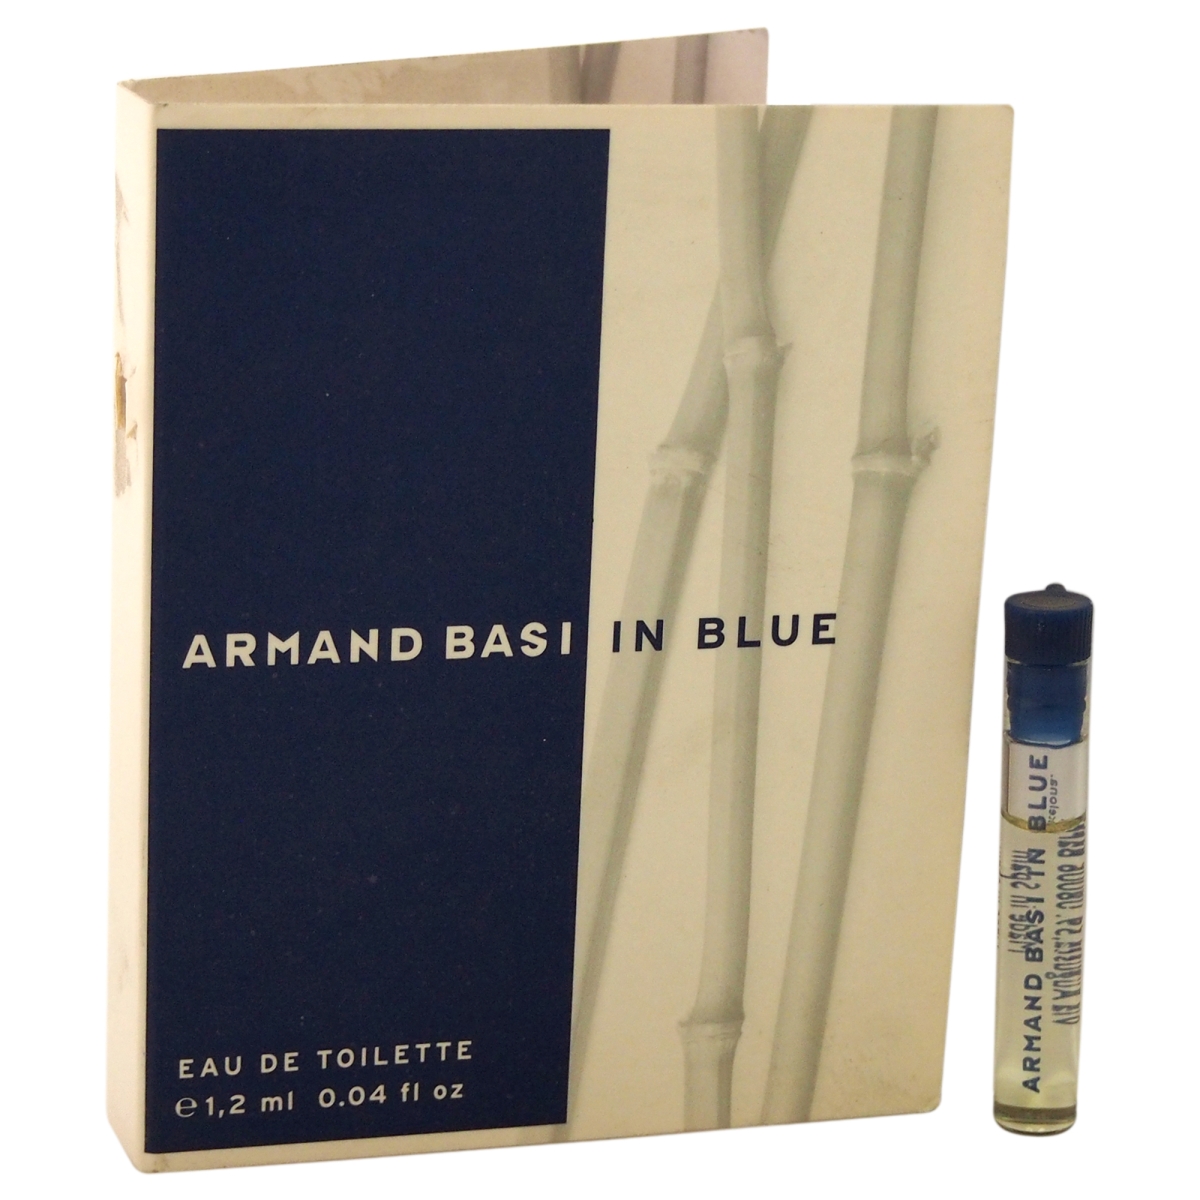 Armand Basi In Blue by Armand Basi for Men - 1.2 ml EDT Spray Vial (Mini)